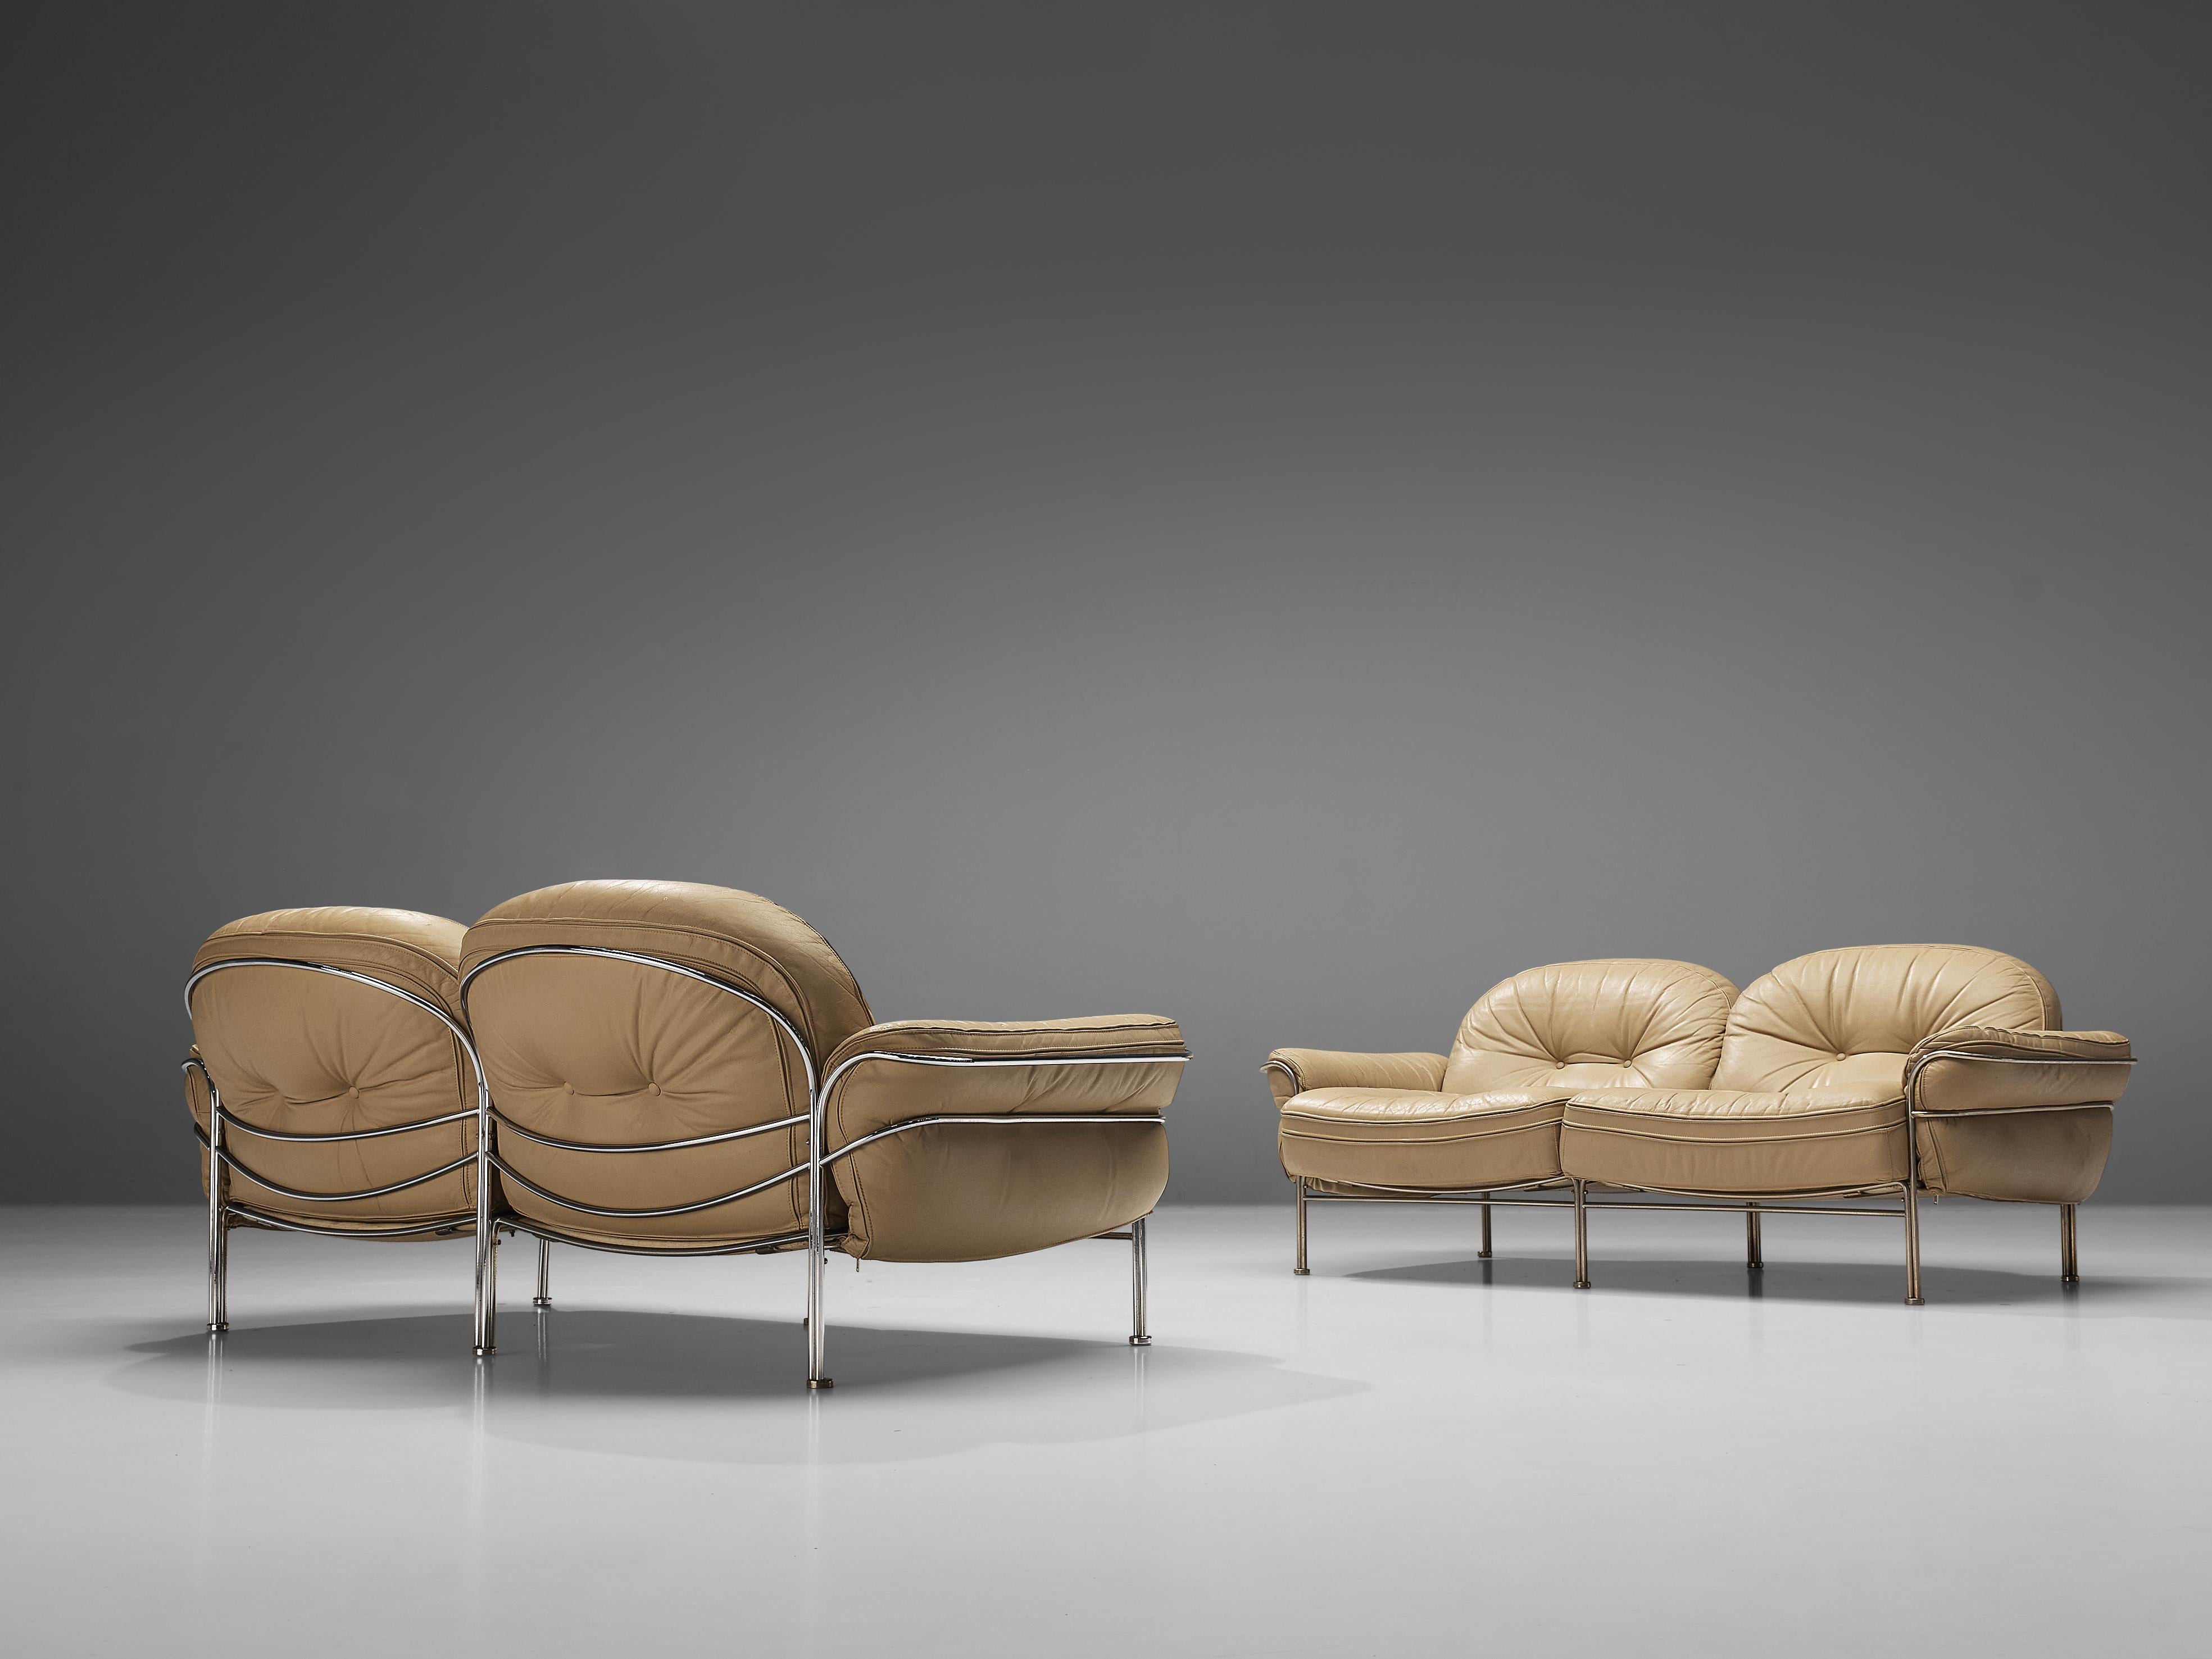 Sofas, metal, leather, Italy, 1960s.

Elegant, tubular two seat sofa. The sofa features a curved, chromed frame that holds the tufted, leather cushions. The piece has beautiful soft lines, such as rounded legs and the curved armrests. This